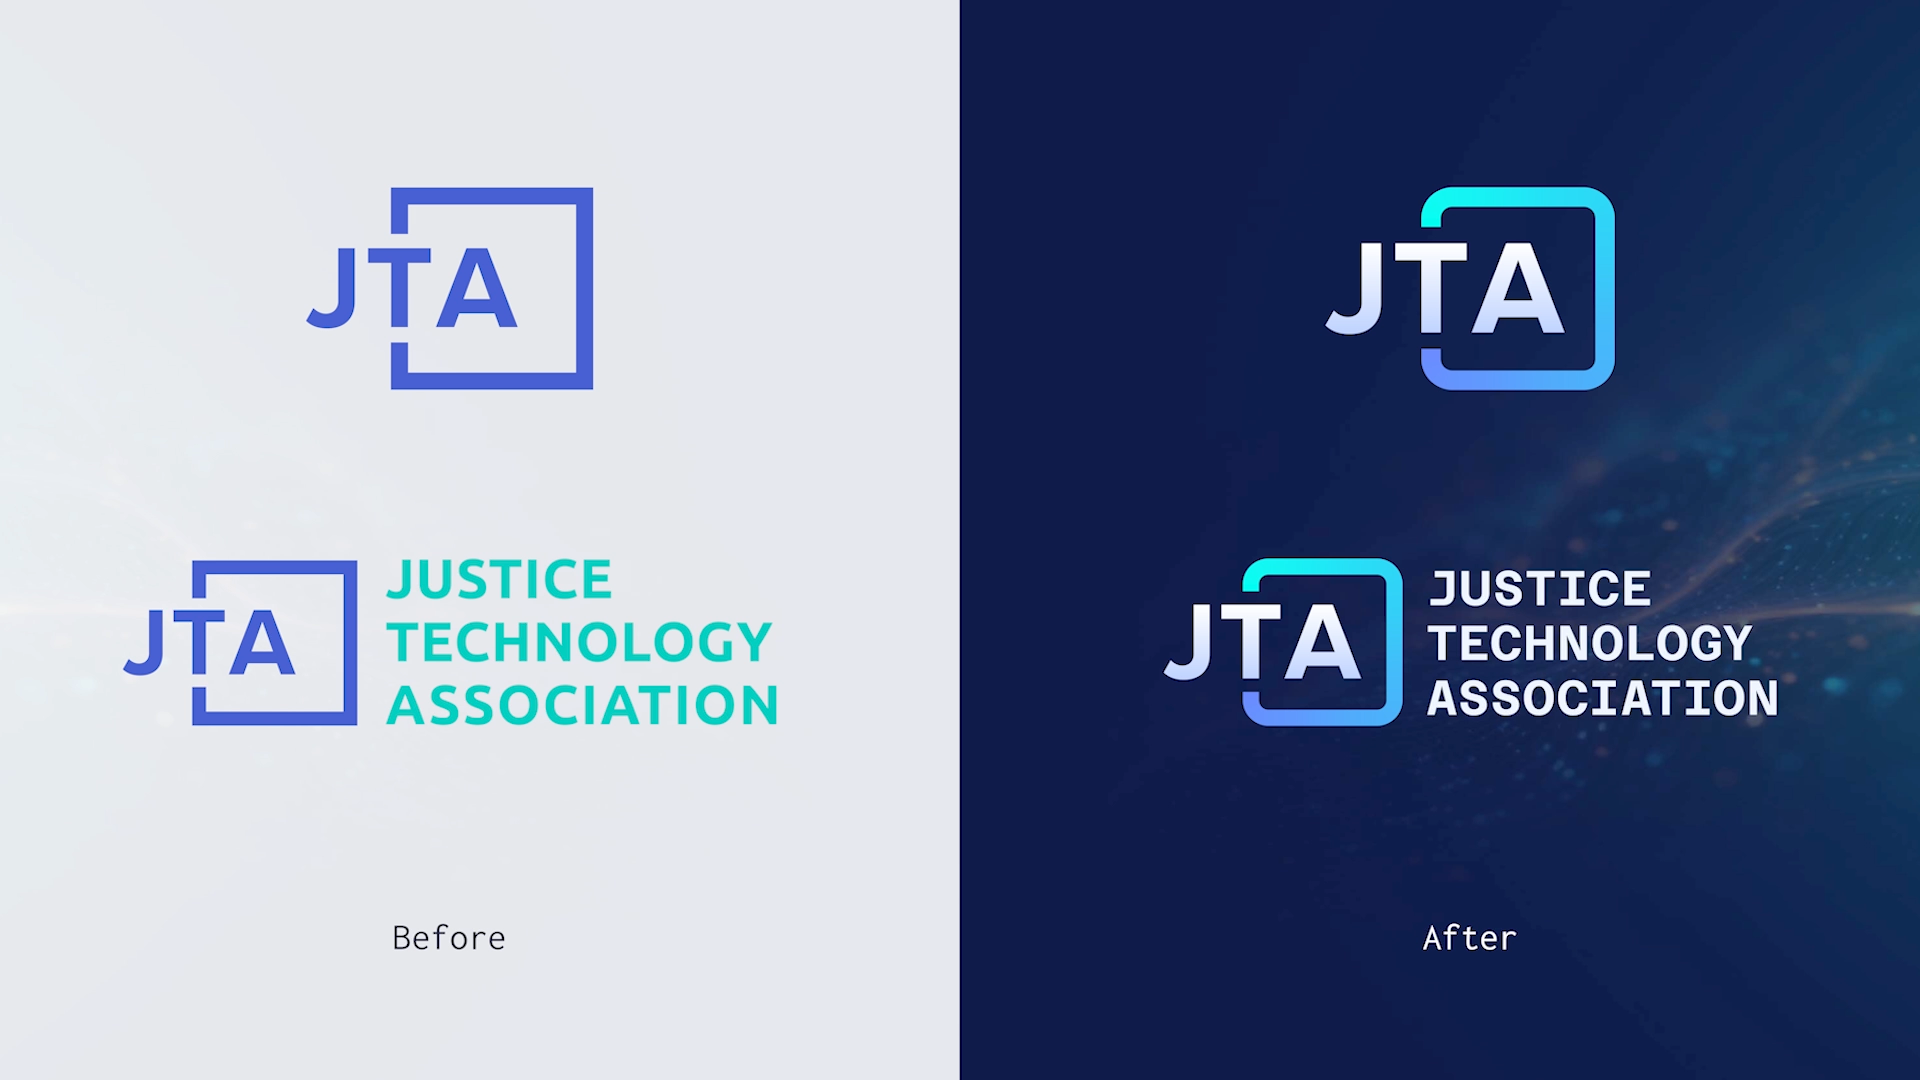  Our synergy with the Justice Tech Association